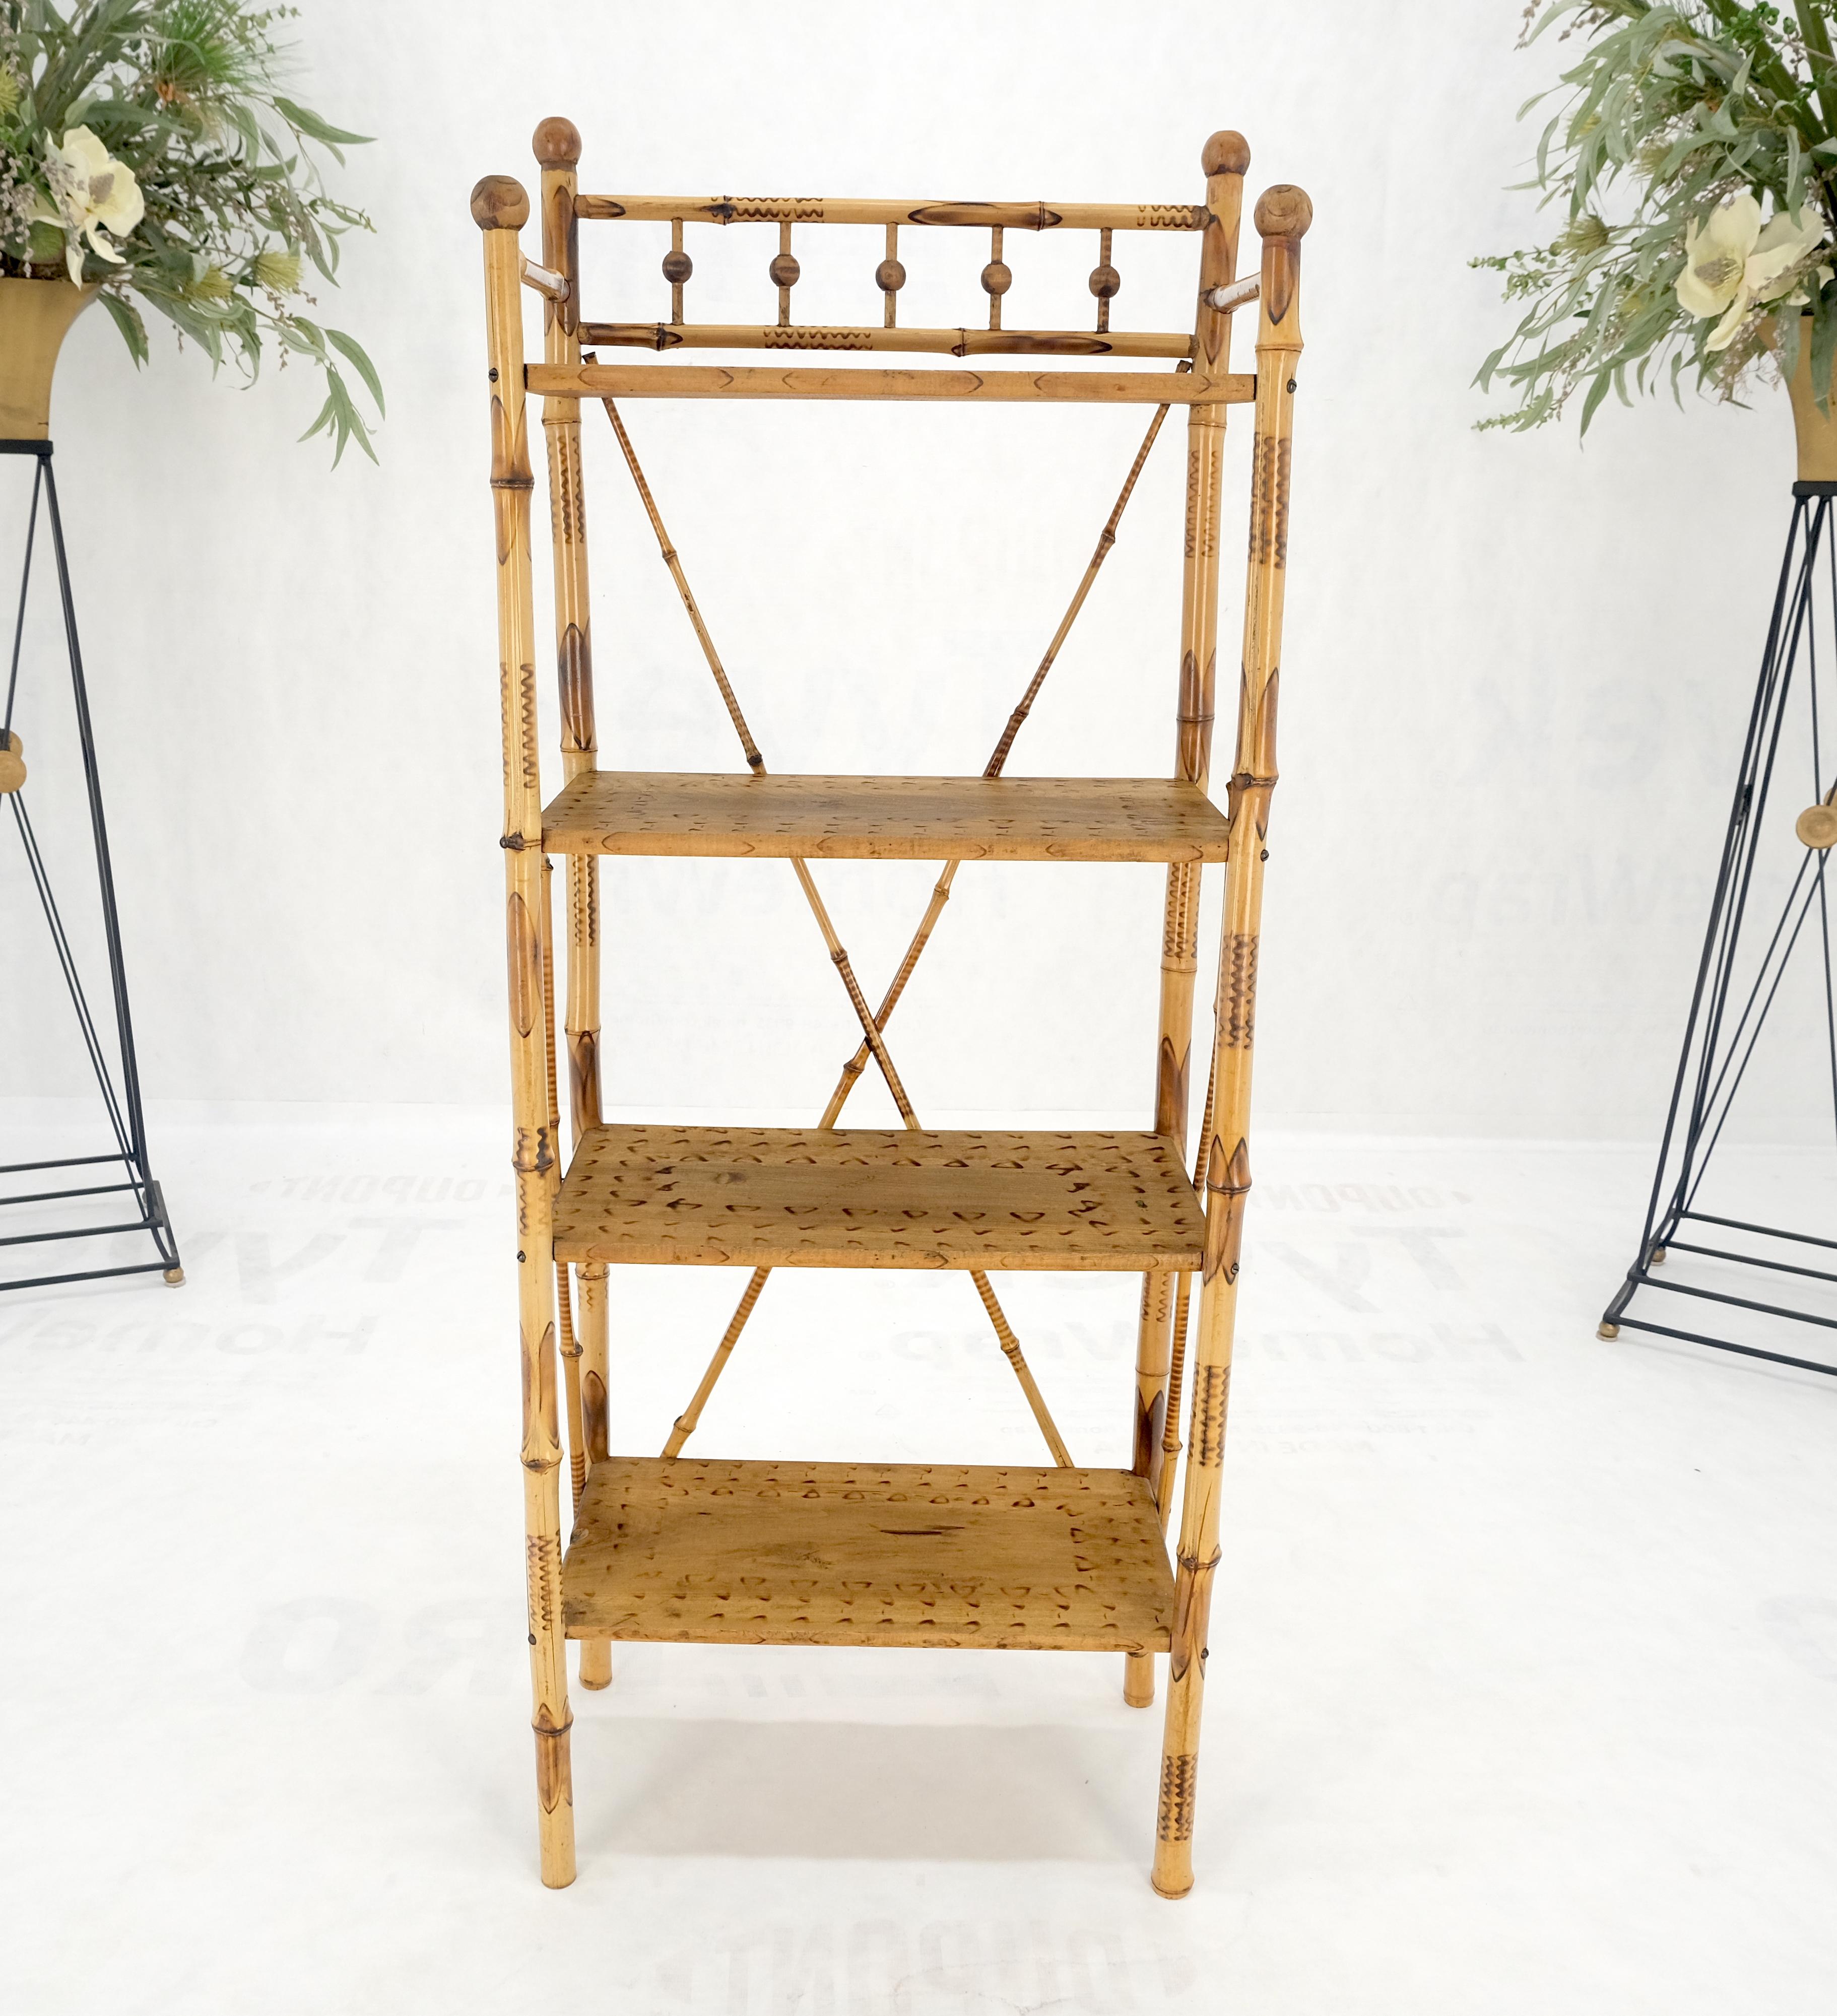 Burnt Bamboo Ball Finials 4 Tier Small Decorative Etagere Shelving Bookcase MINT In Good Condition For Sale In Rockaway, NJ